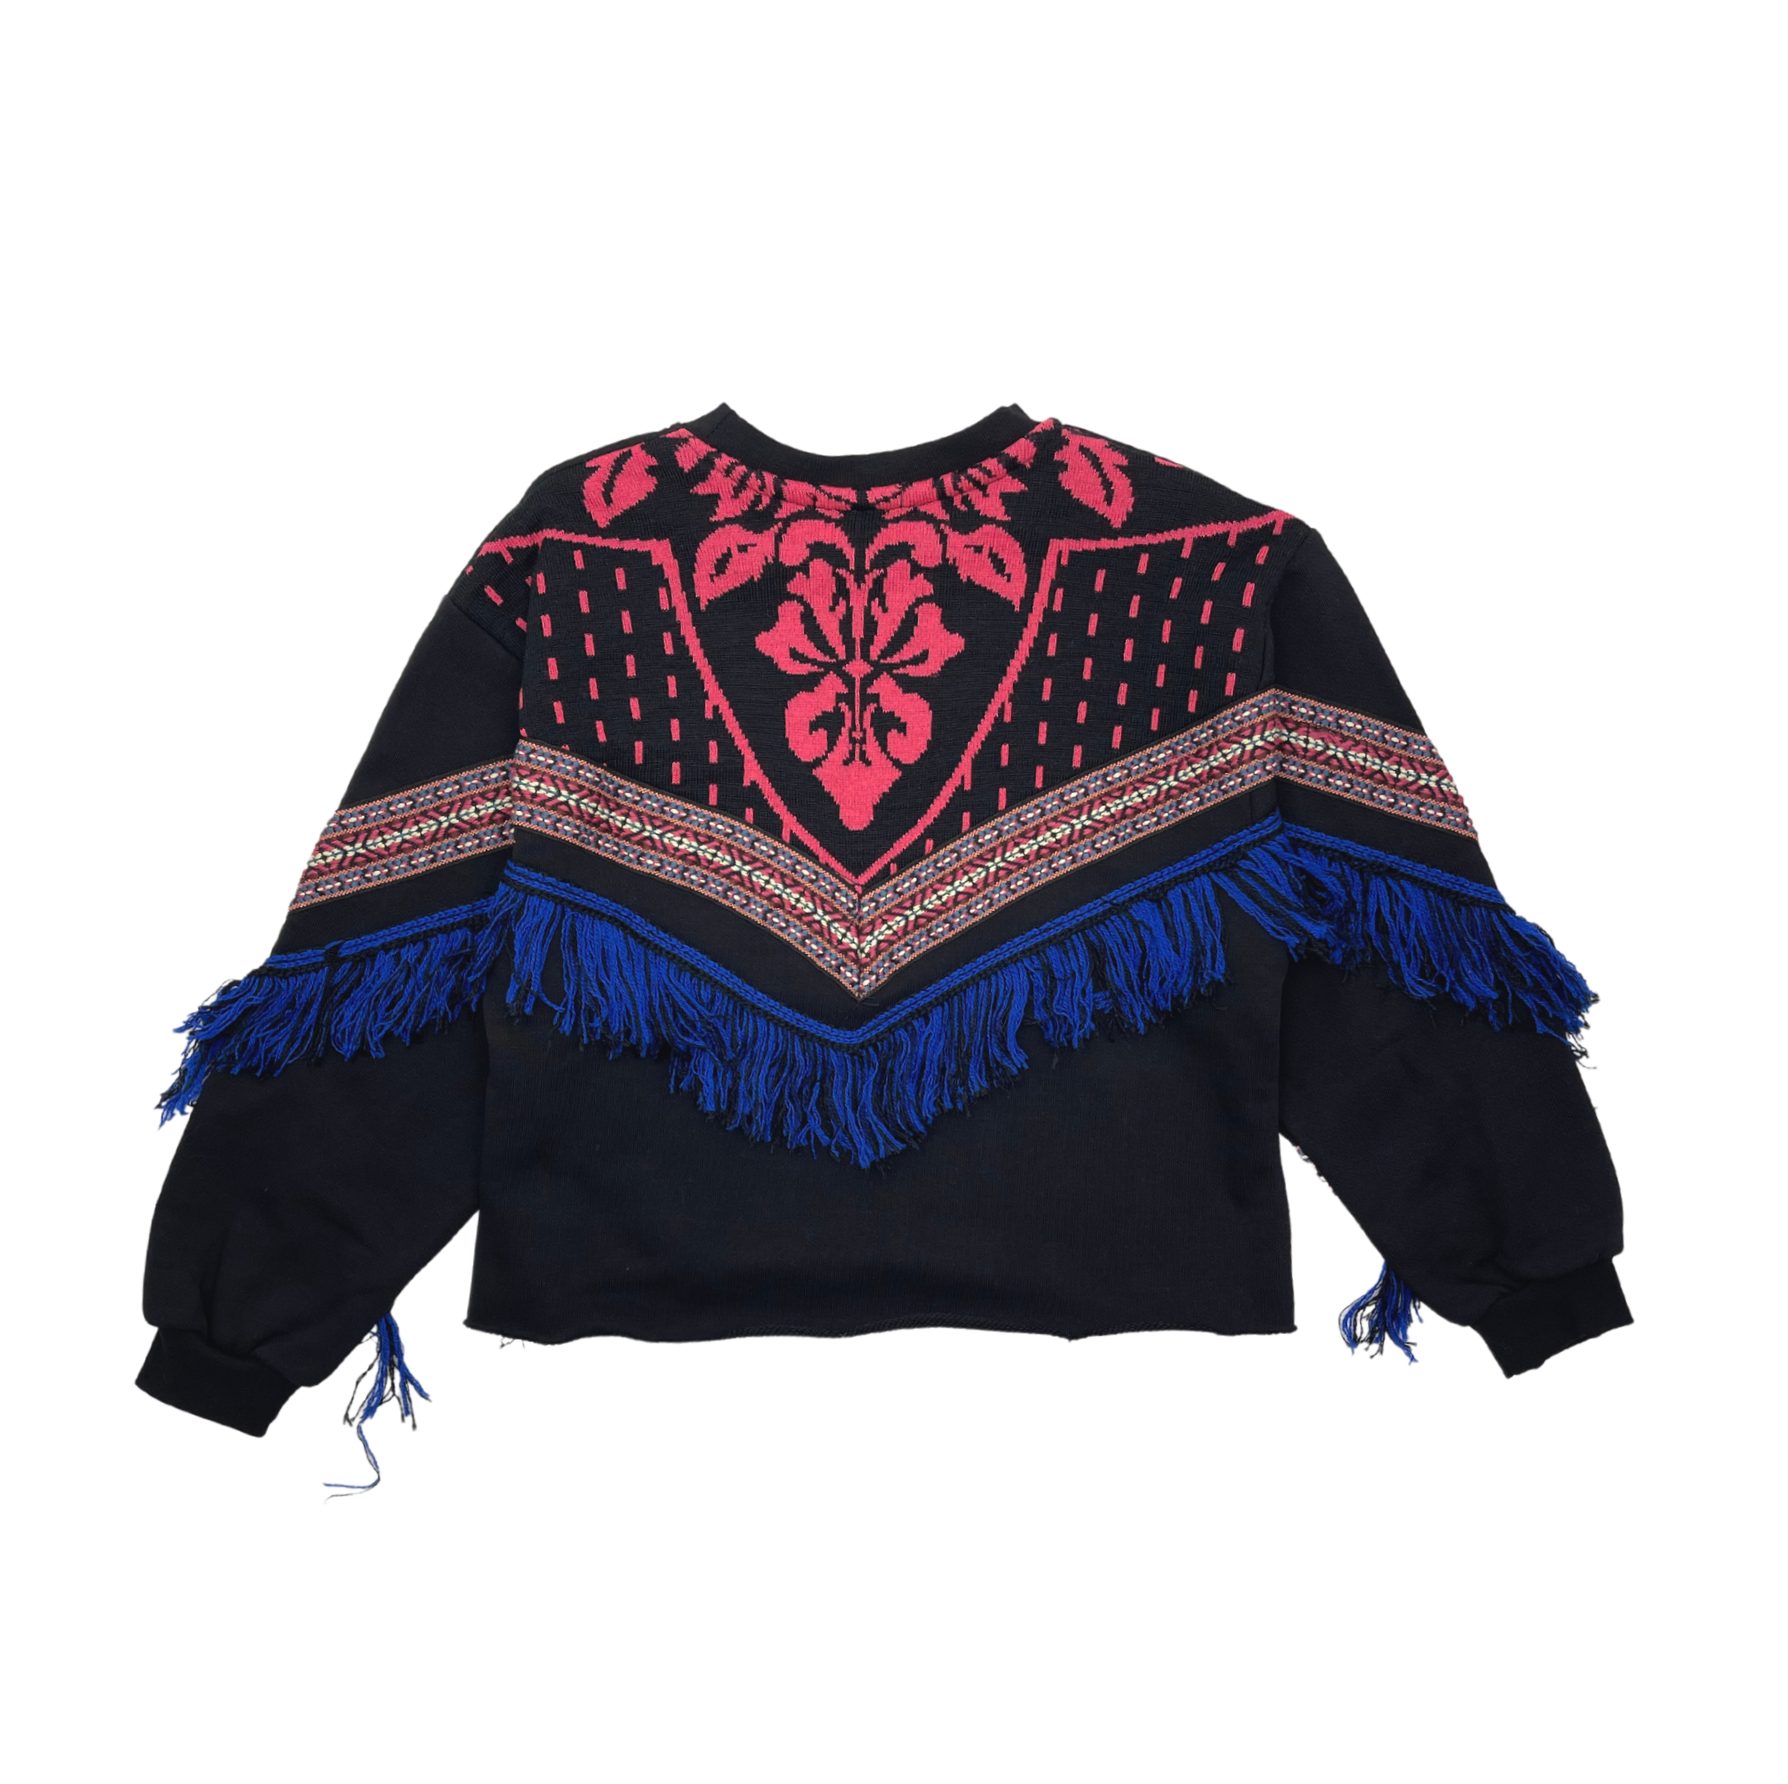 AKEP - Black sweatshirt with embroidery &amp; colored fringing - 10 years old